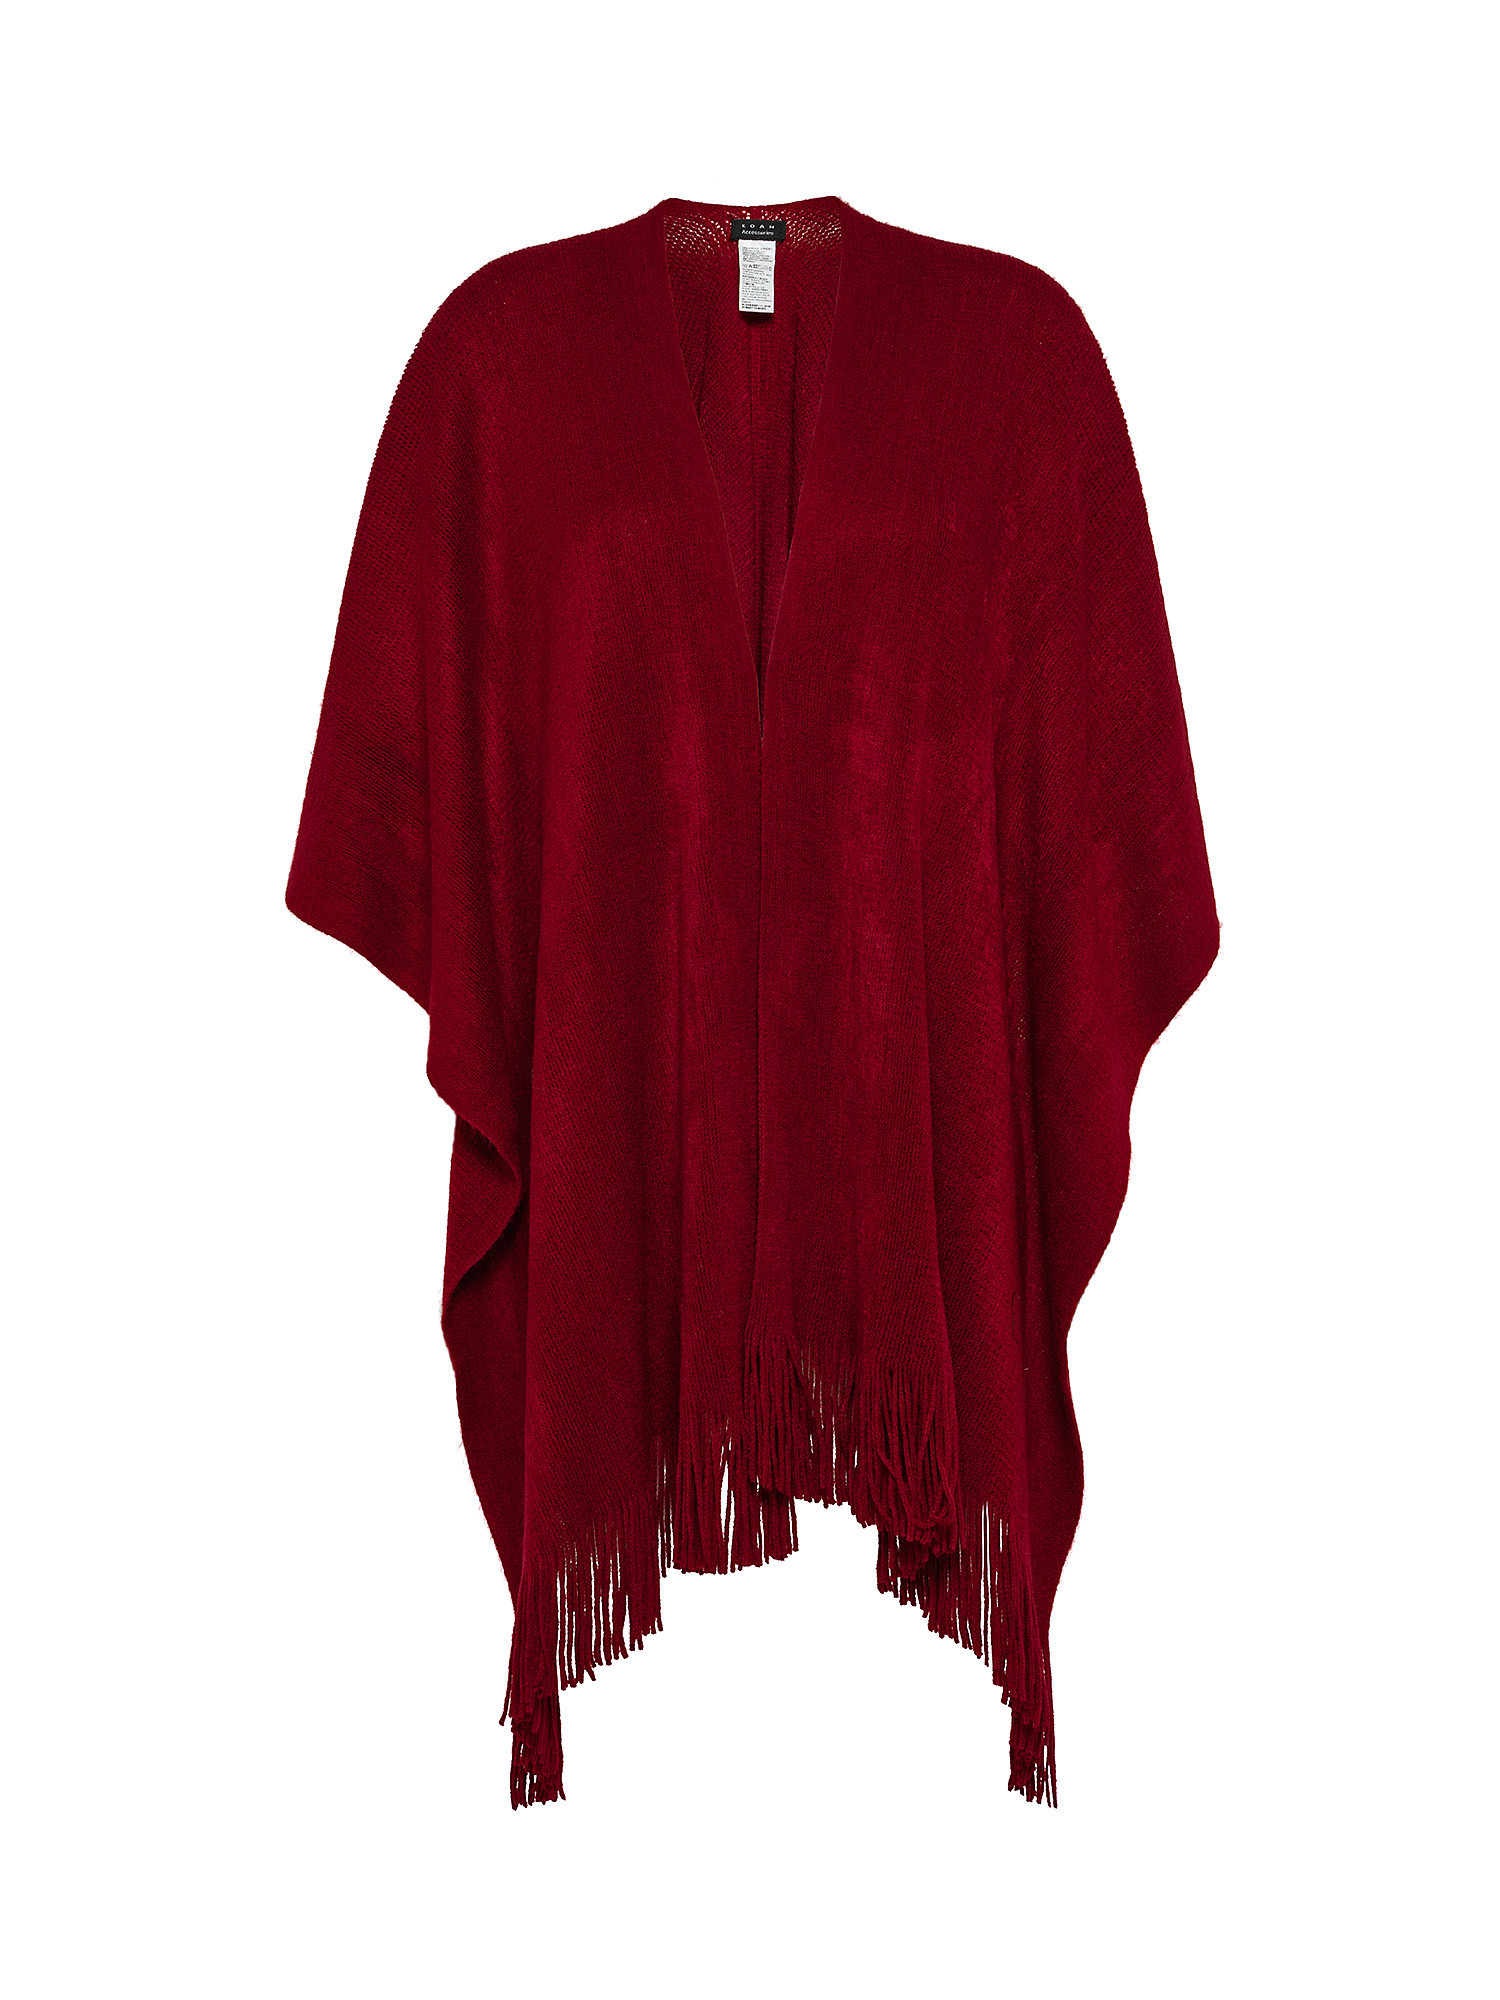 Cape with fringes, Red, large image number 0